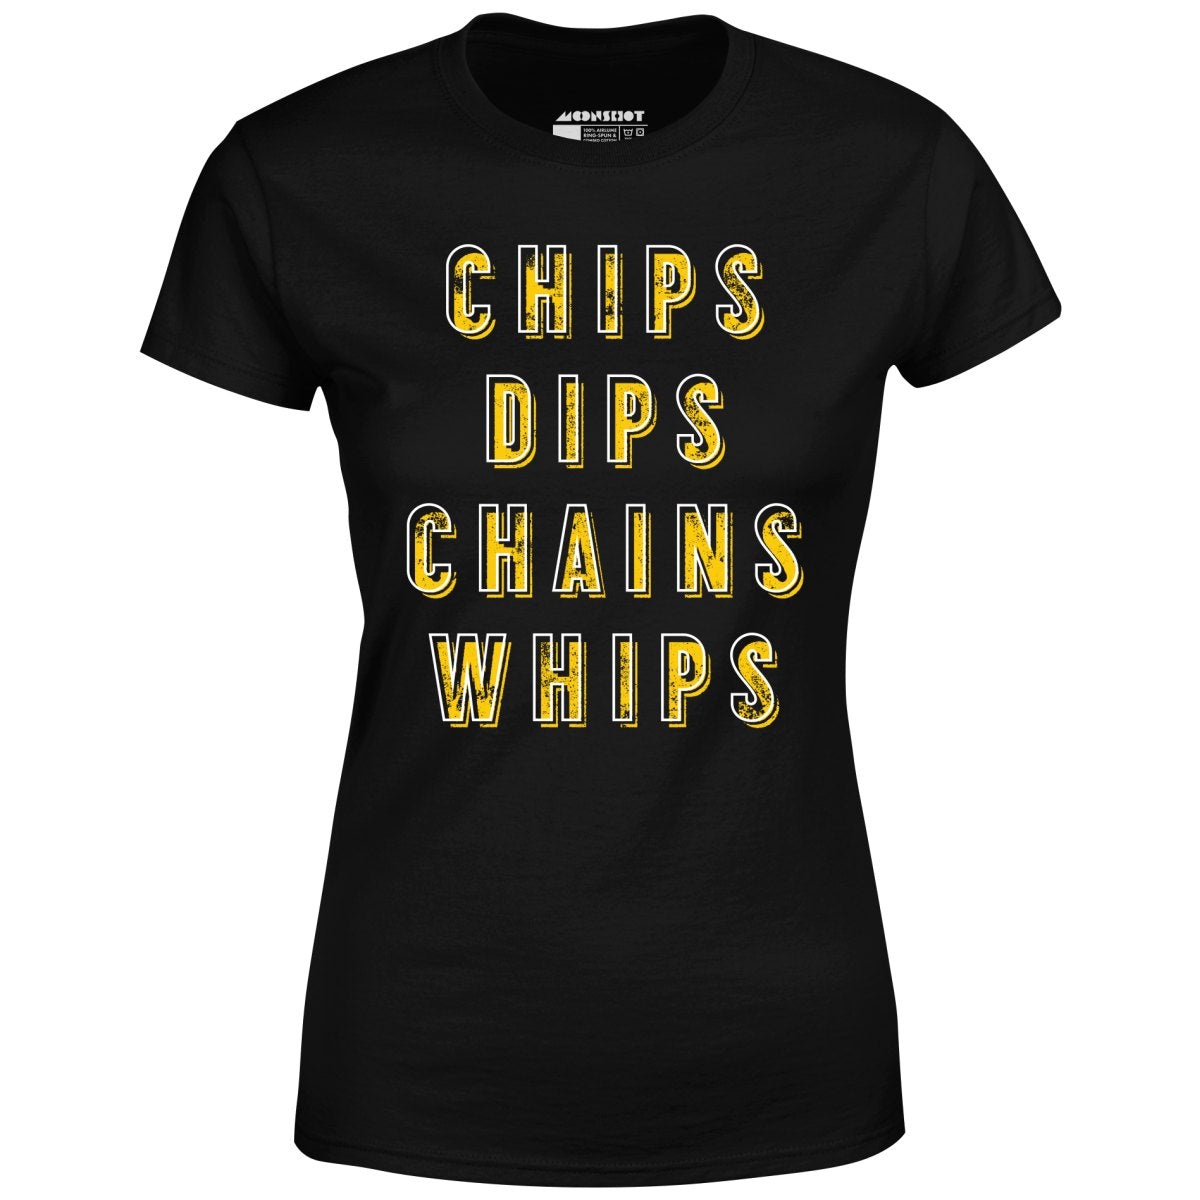 Chips Dips Chains Whips - Women's T-Shirt